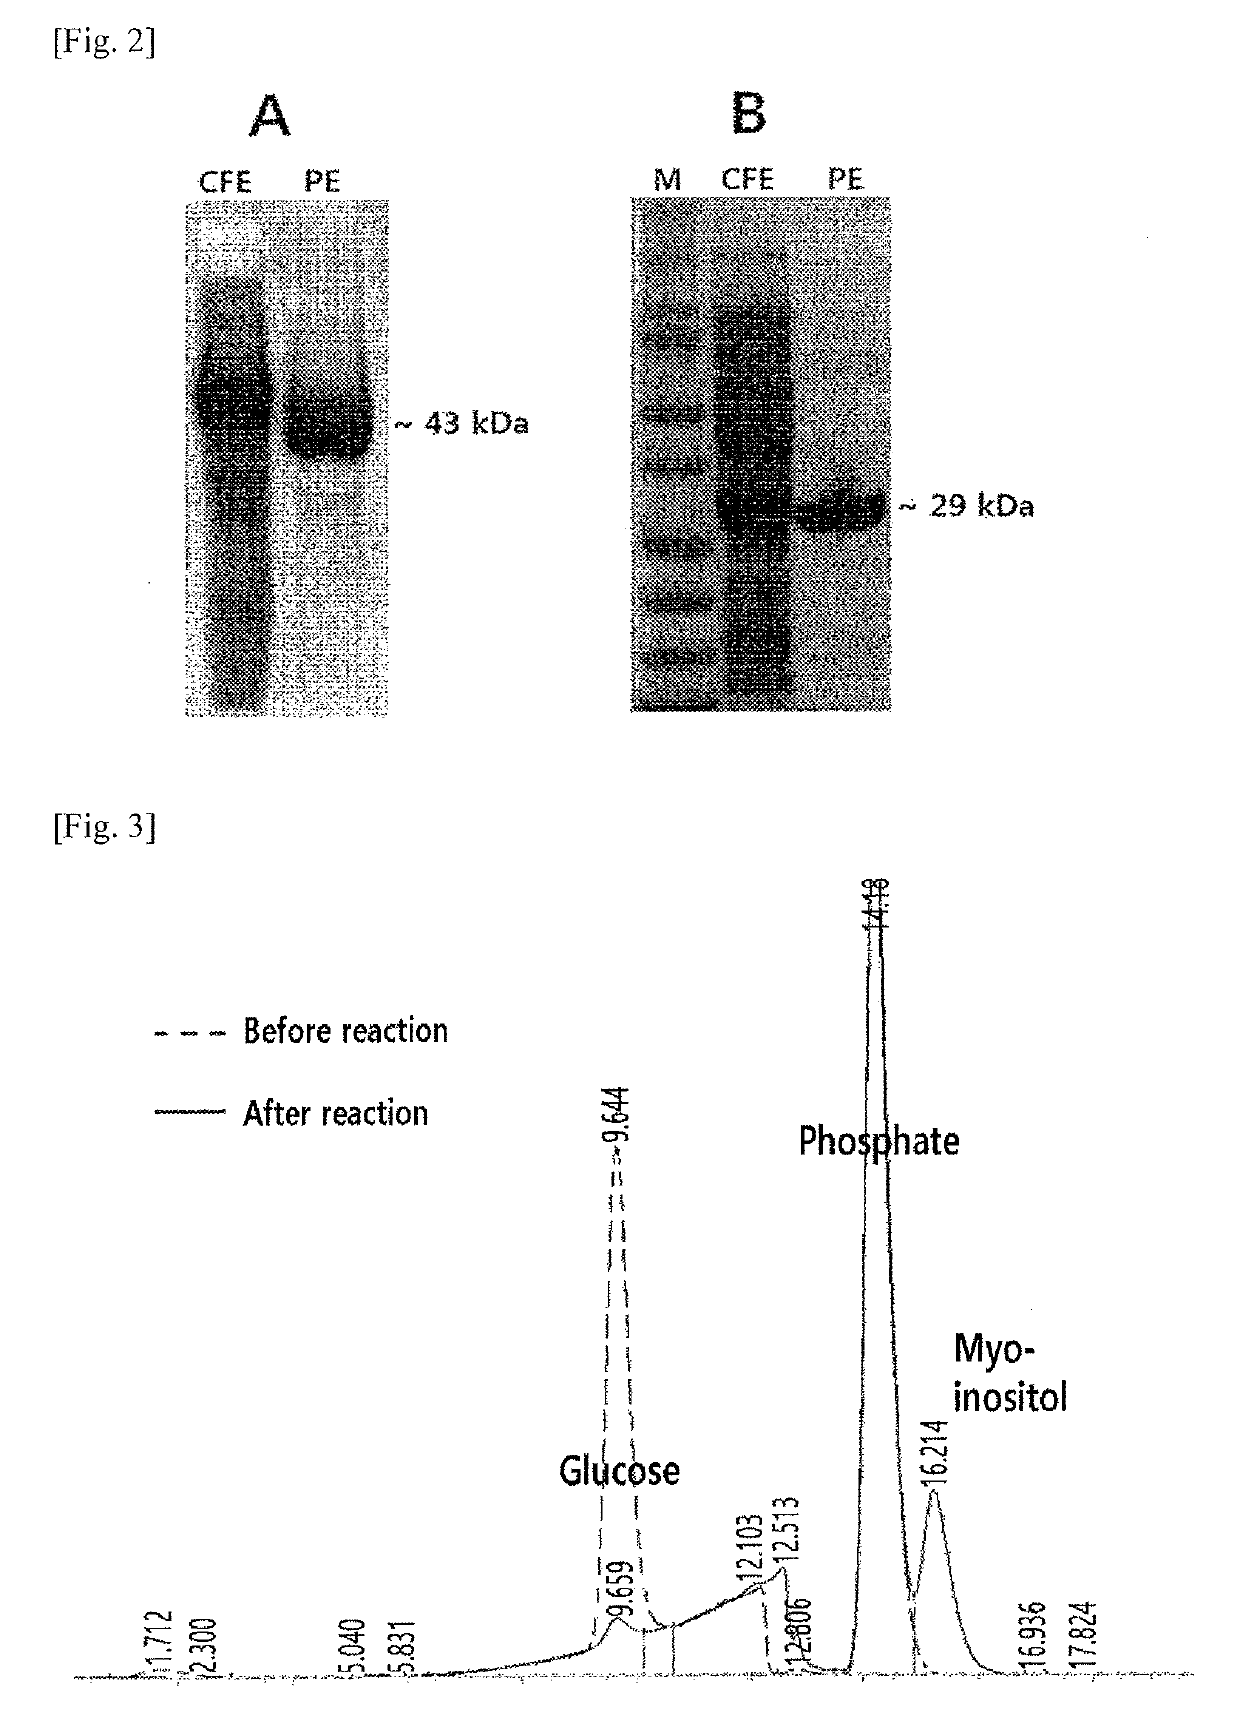 Method for enzymatically preparing highly concentrated myo-inositol